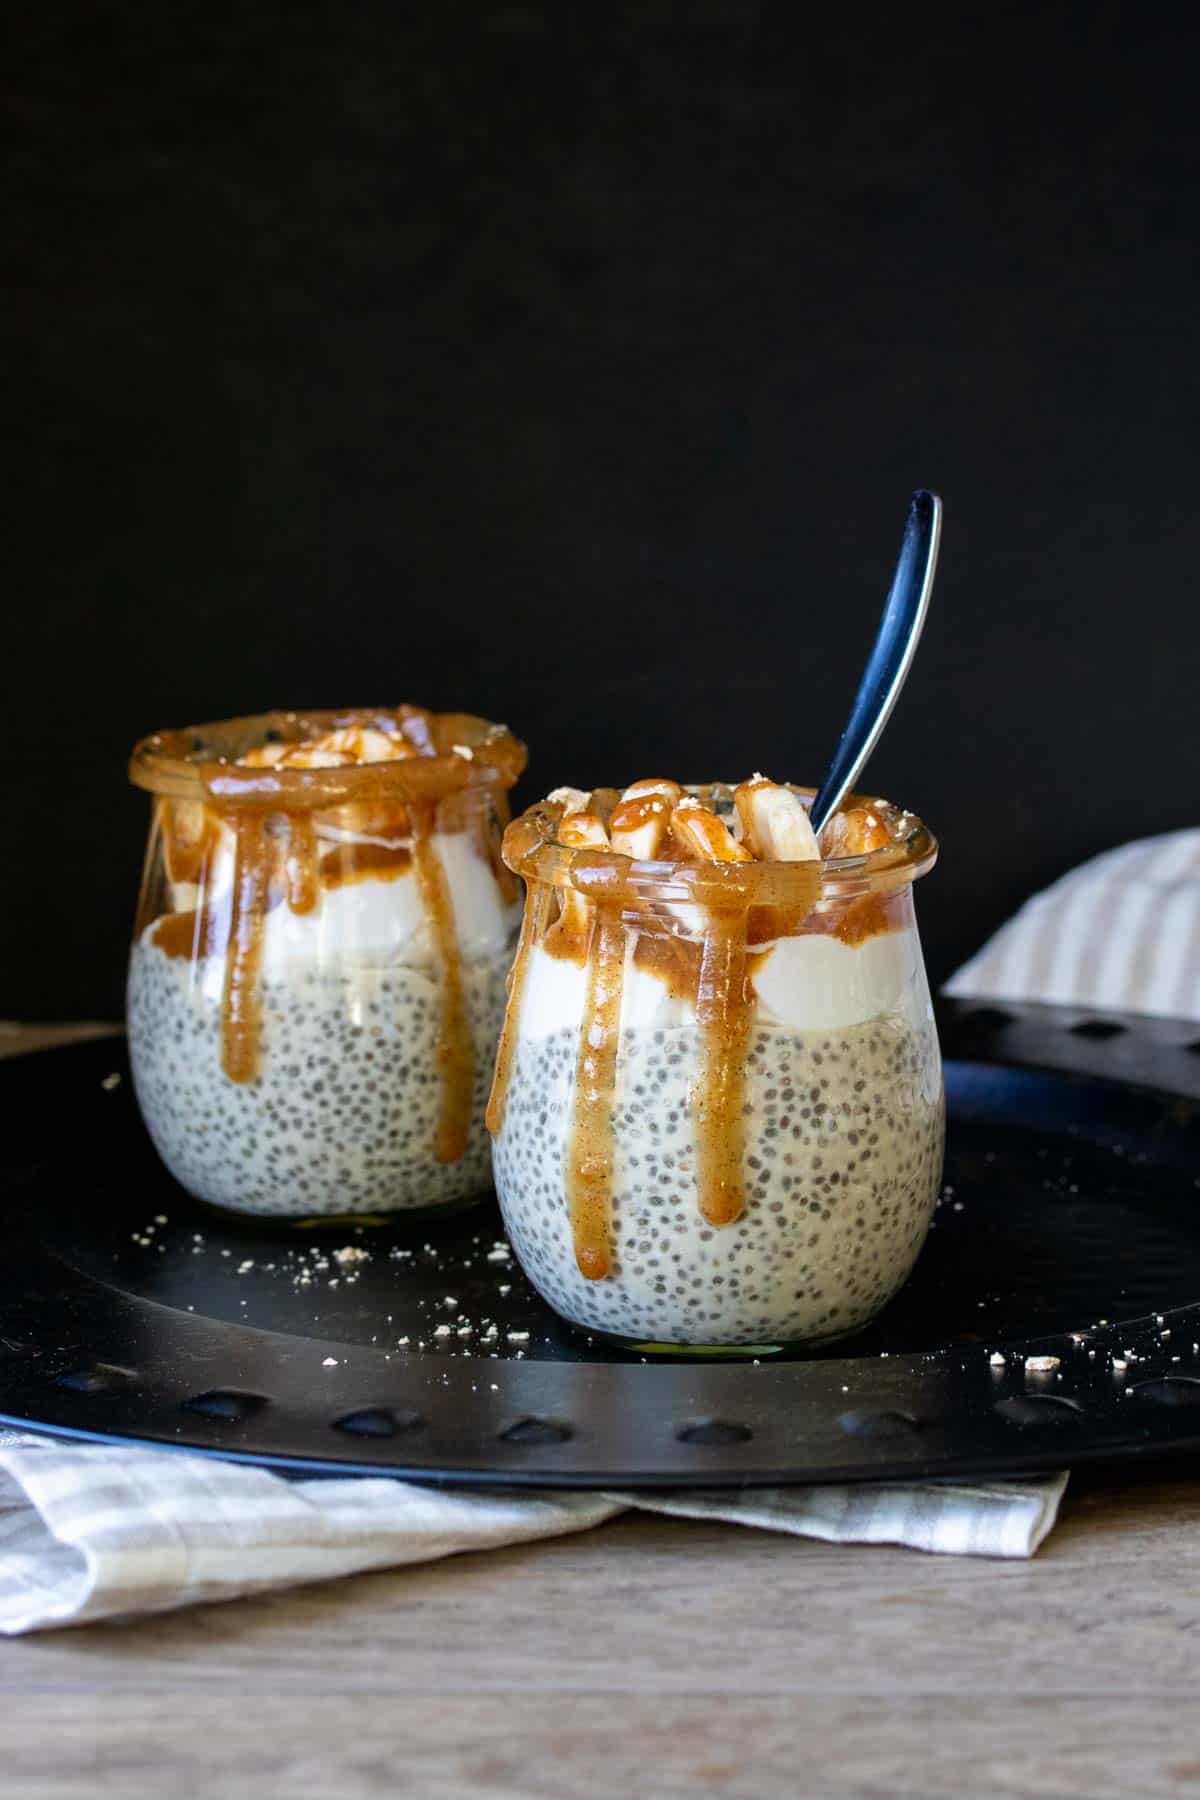 Chia pudding with whipped cream, bananas and caramel in two glass jars on a black plate.